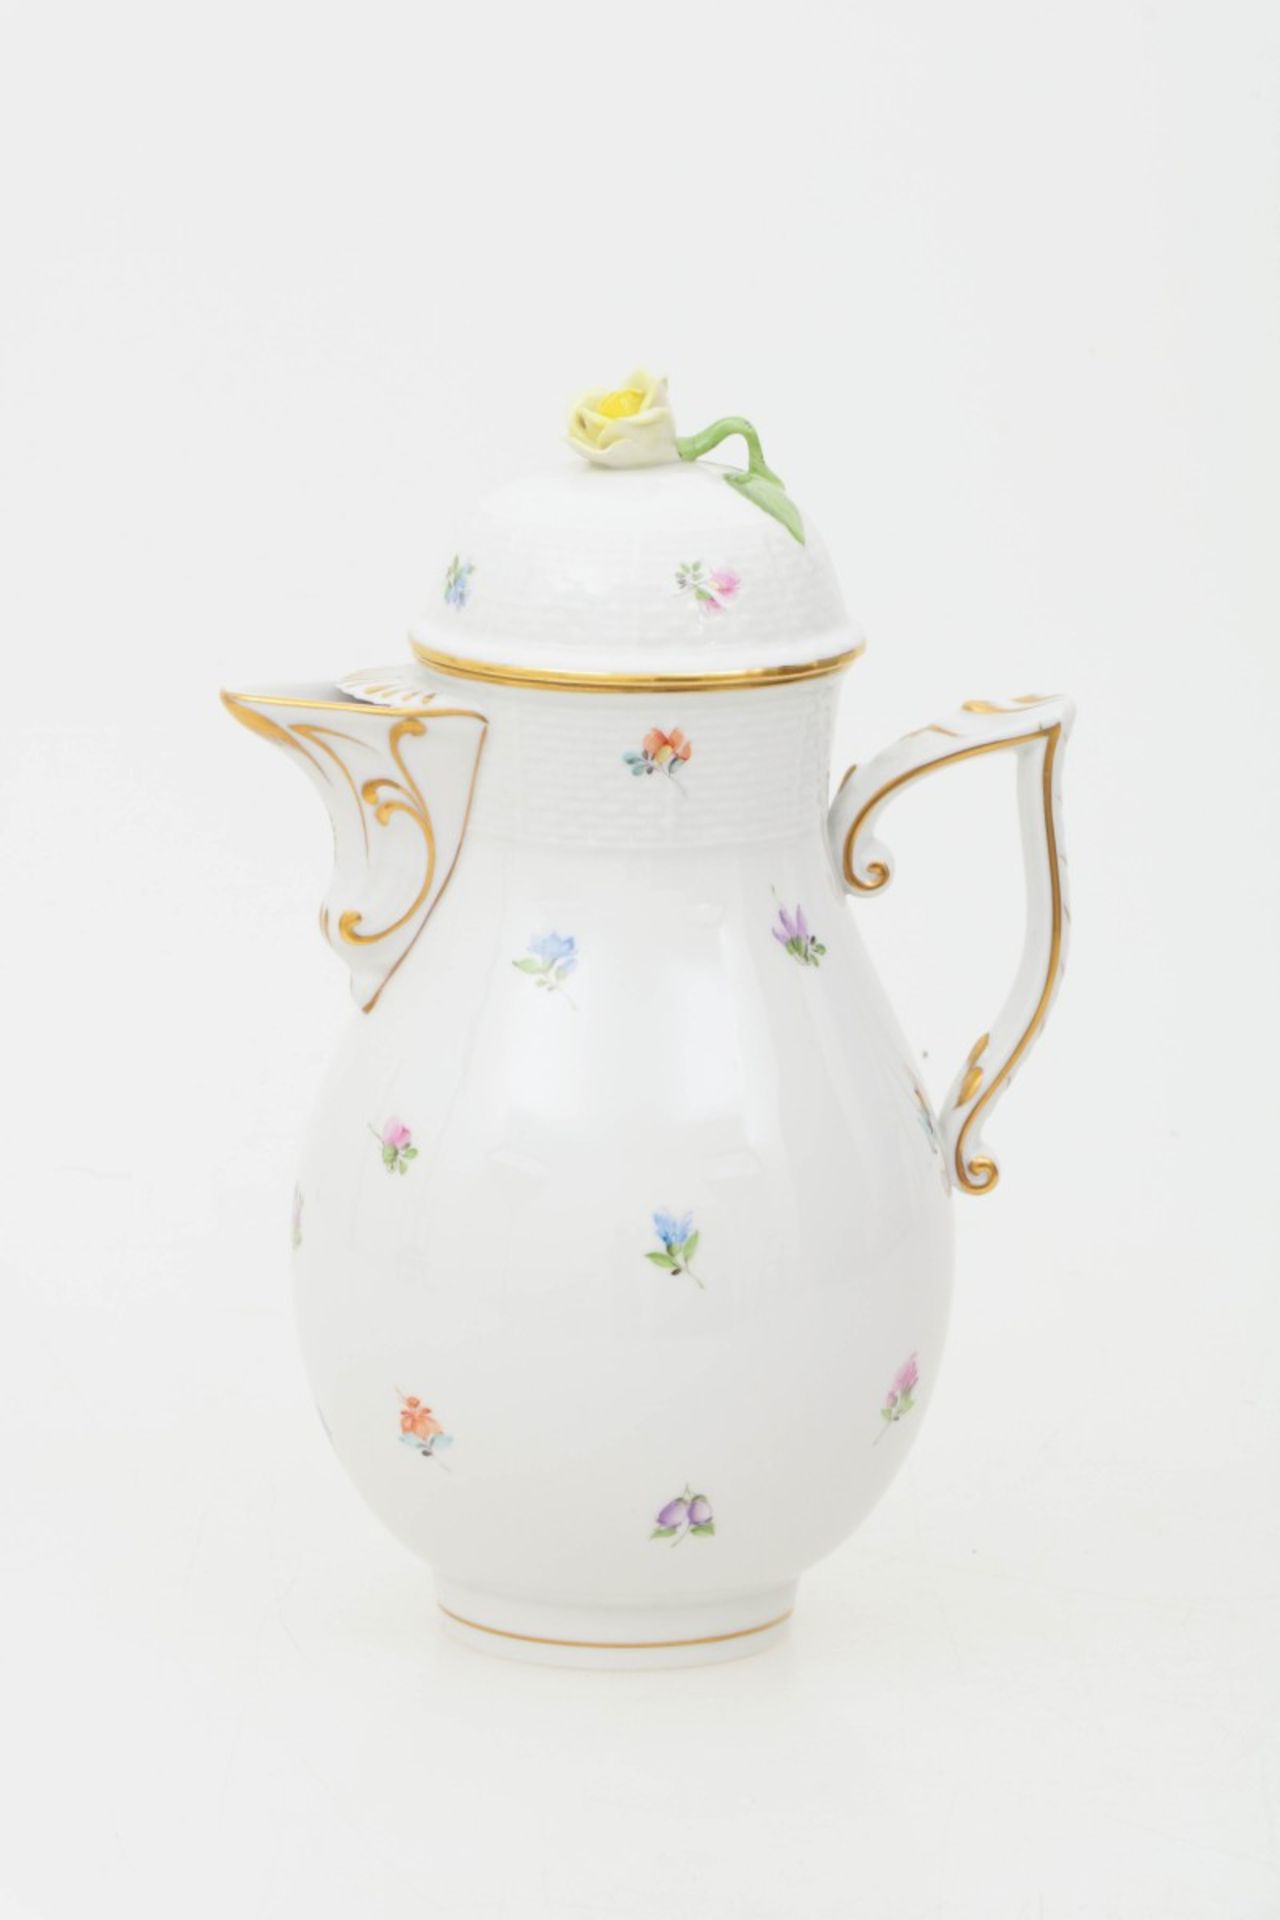 A porcelain coffee pot, Herend, Hungary, late 20th century.